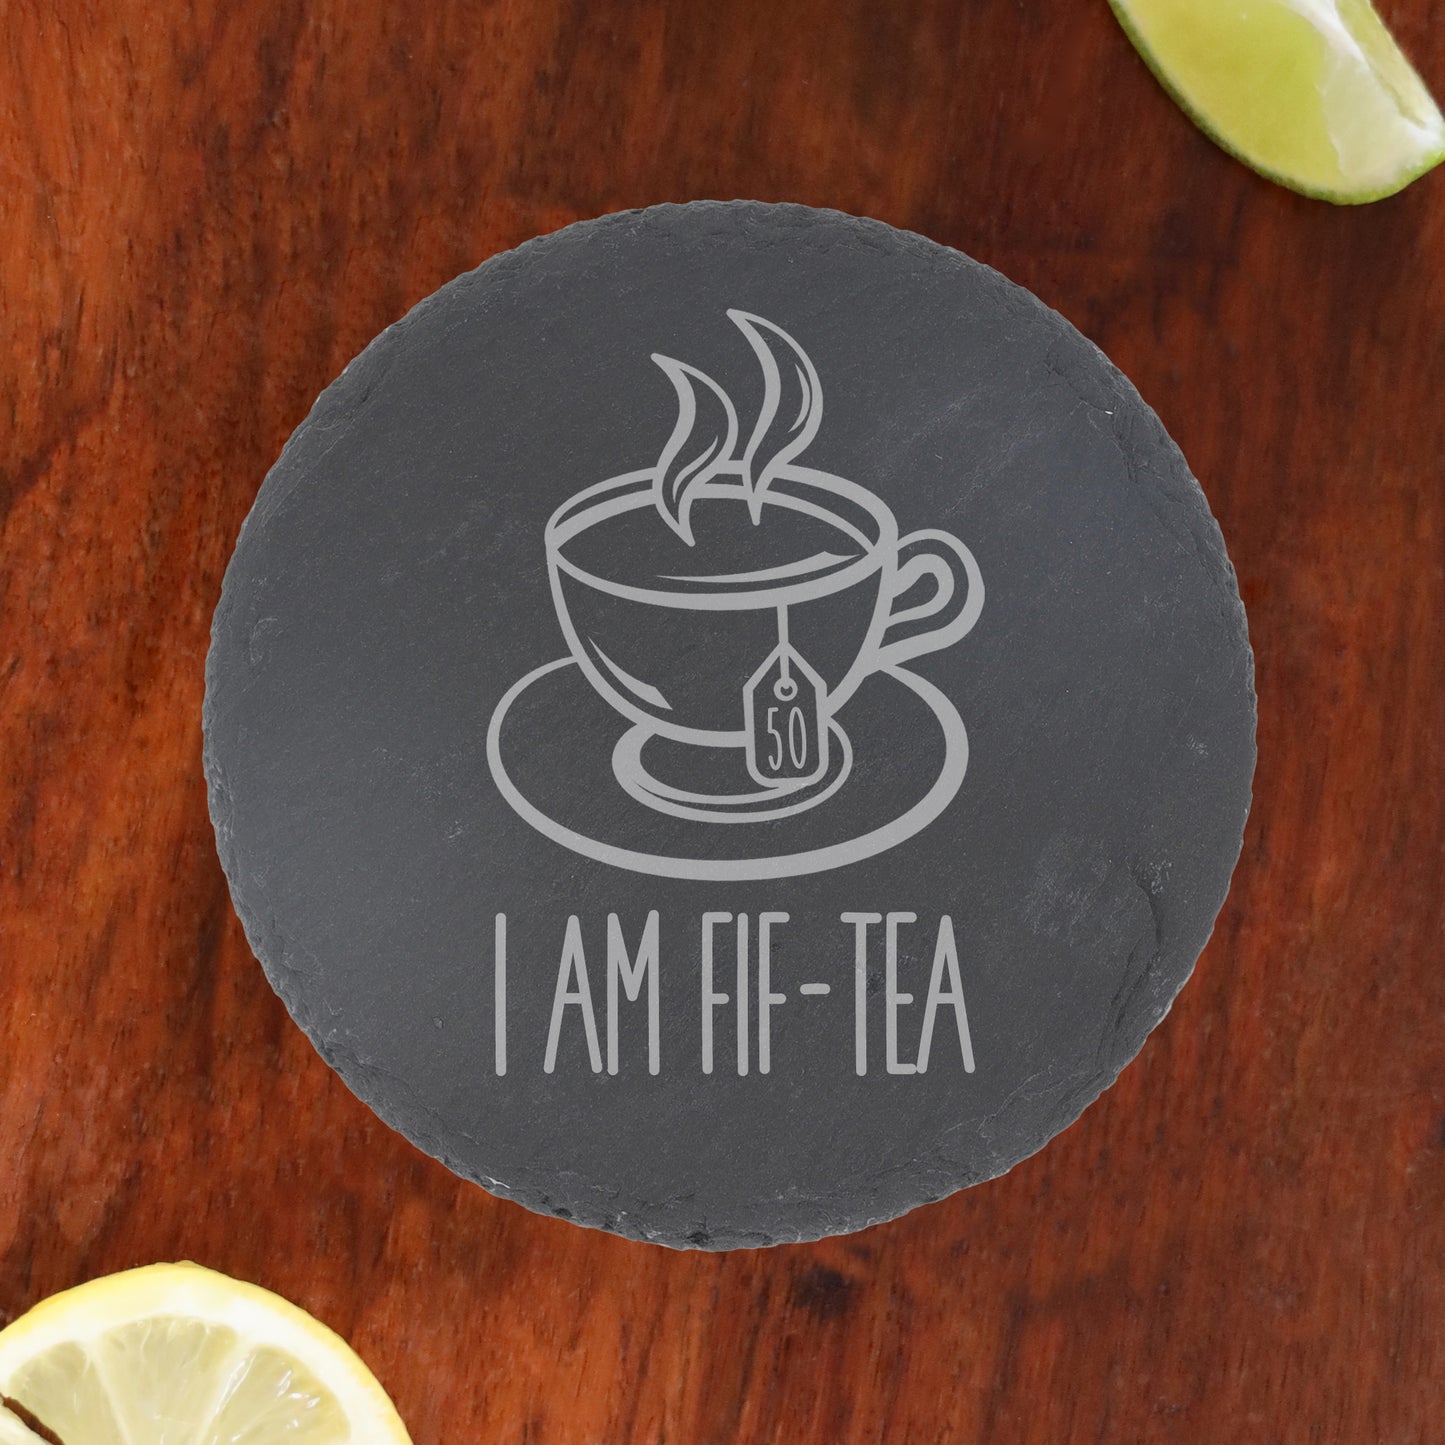 I Am Fif-Tea Funny 50th Birthday Mug Gift for Tea Lovers  - Always Looking Good - Round Slate Coaster Only  